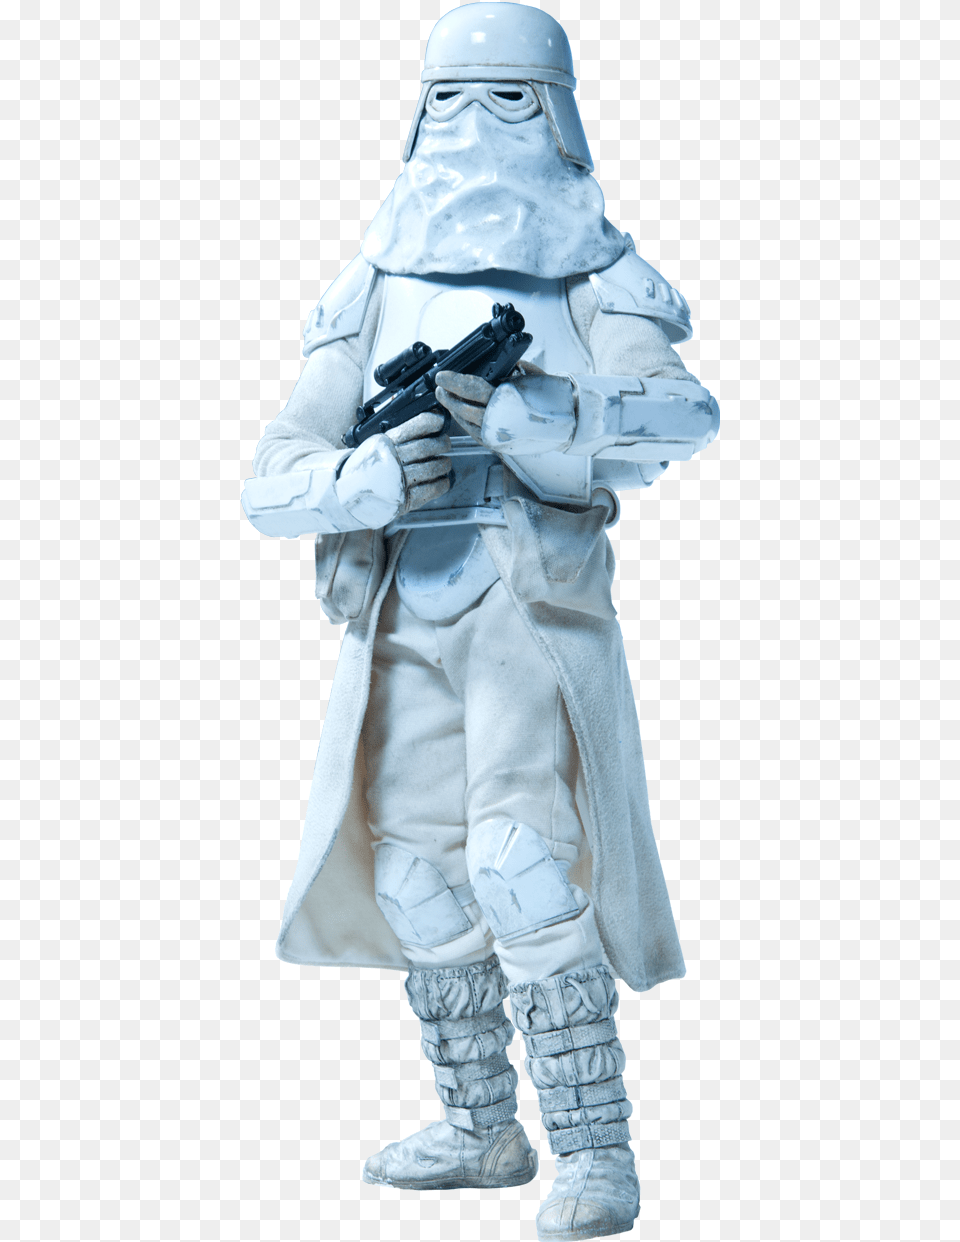 Cold Weather Assault Stormtroopers Also Known As Snowtroopers Sideshow Collectibles Star Wars Action Figure, Boy, Child, Clothing, Coat Png